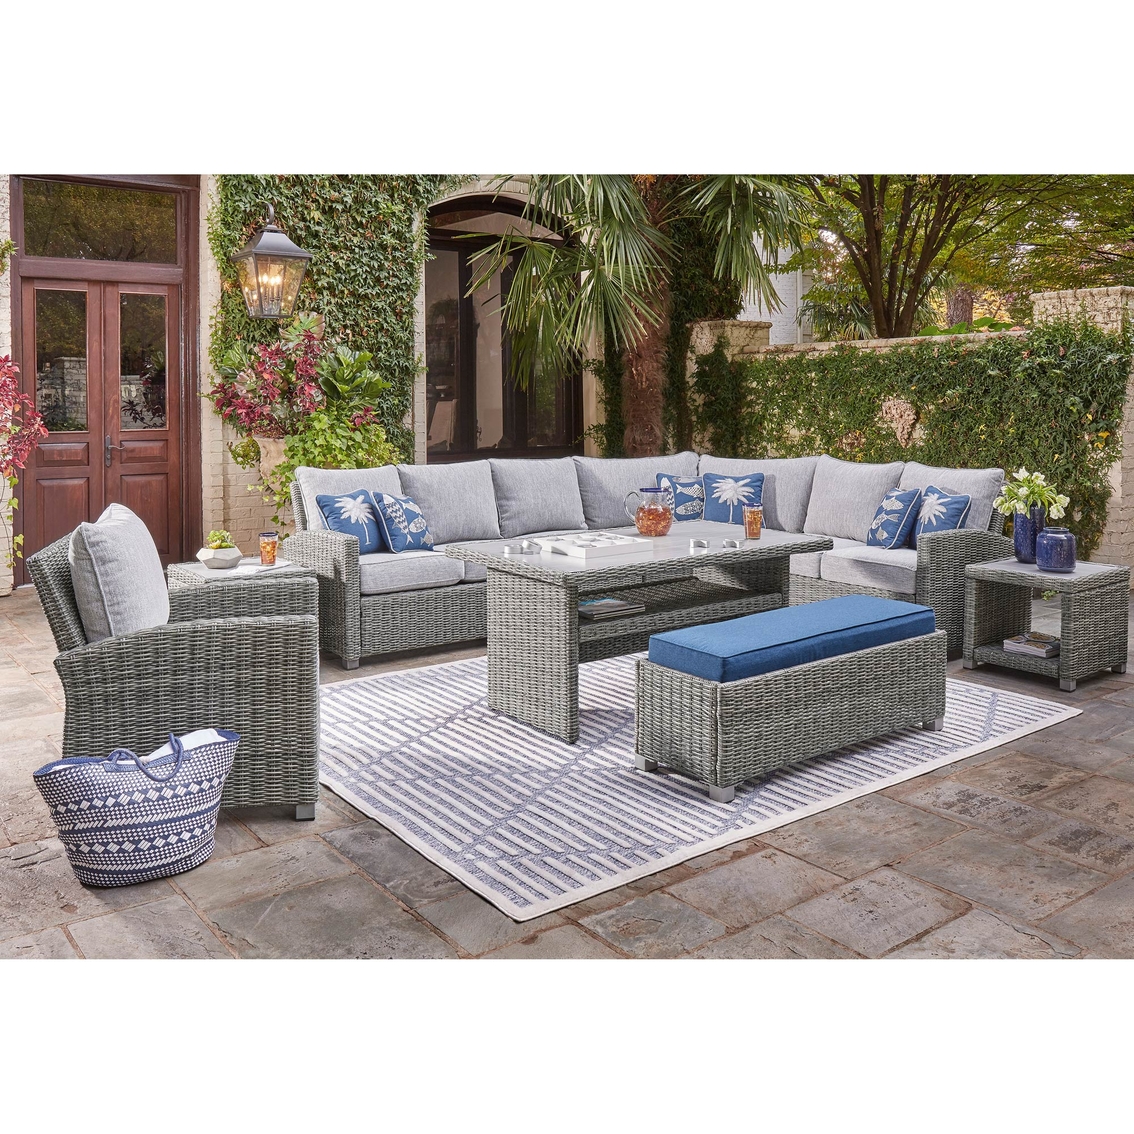 Signature Design by Ashley Naples Beach Outdoor 4 pc. Sectional - Image 10 of 10